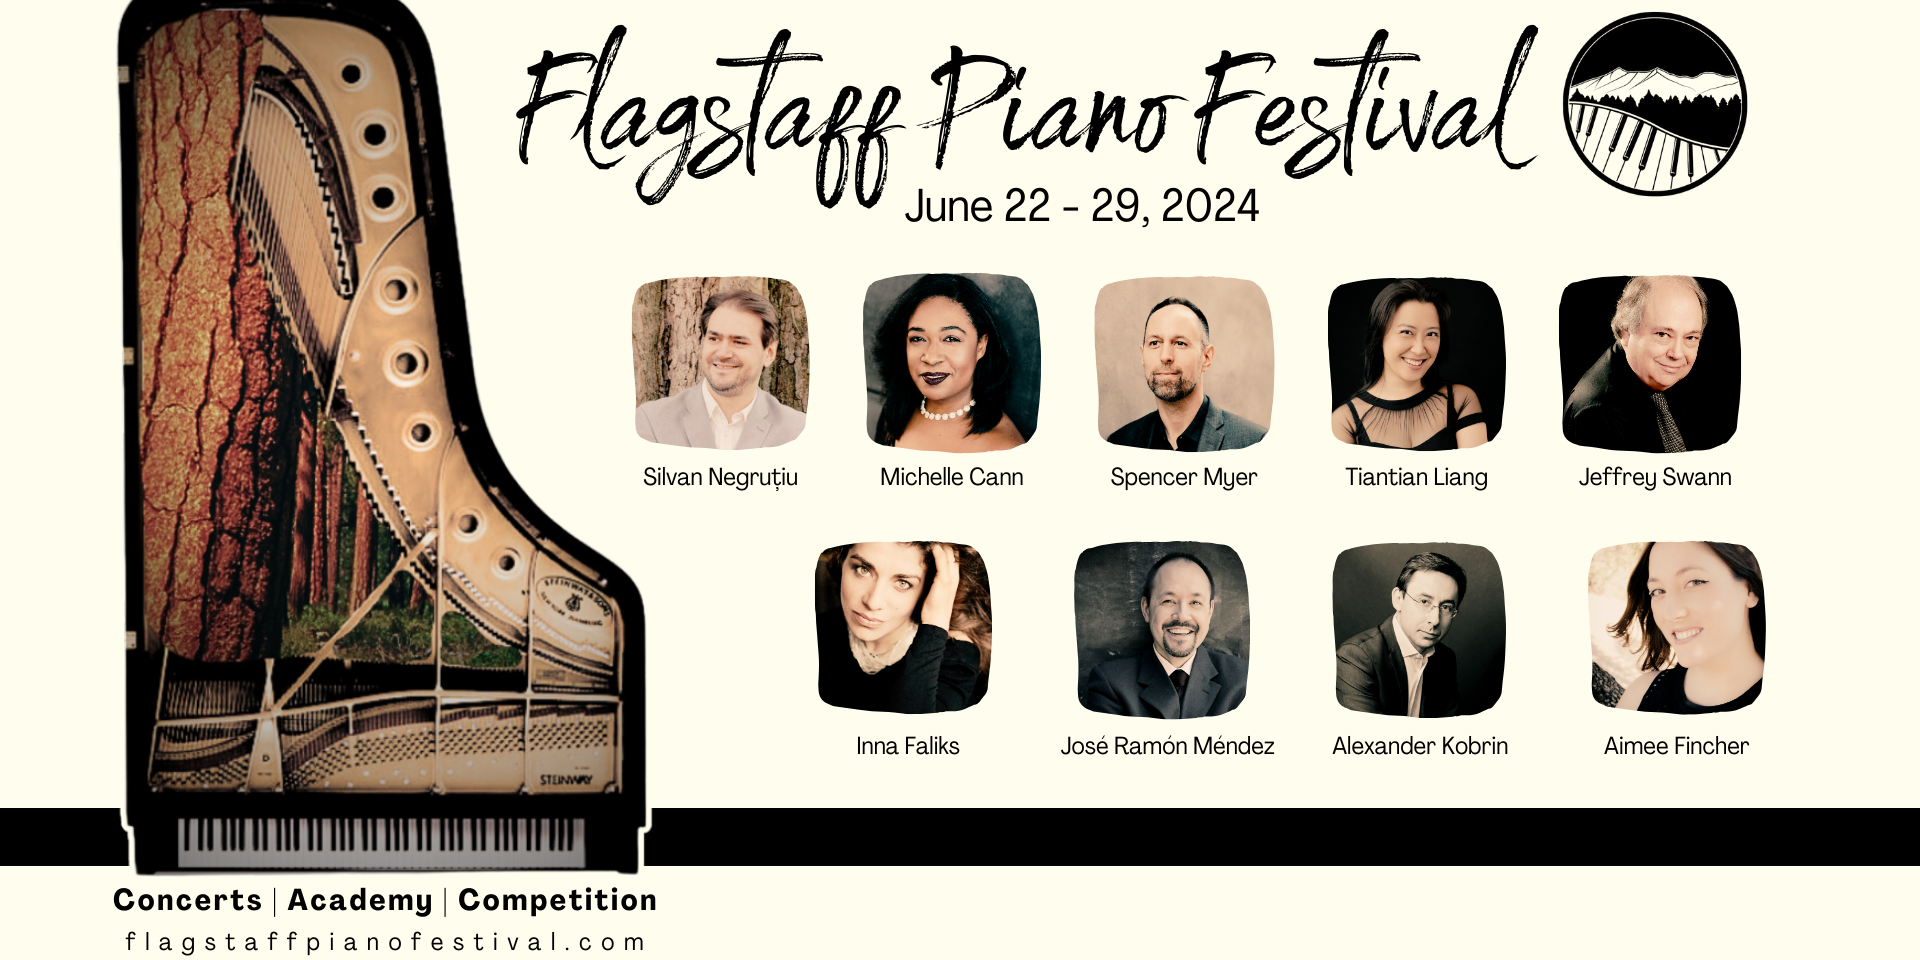 Flagstaff Piano Festival Screen showing all performers